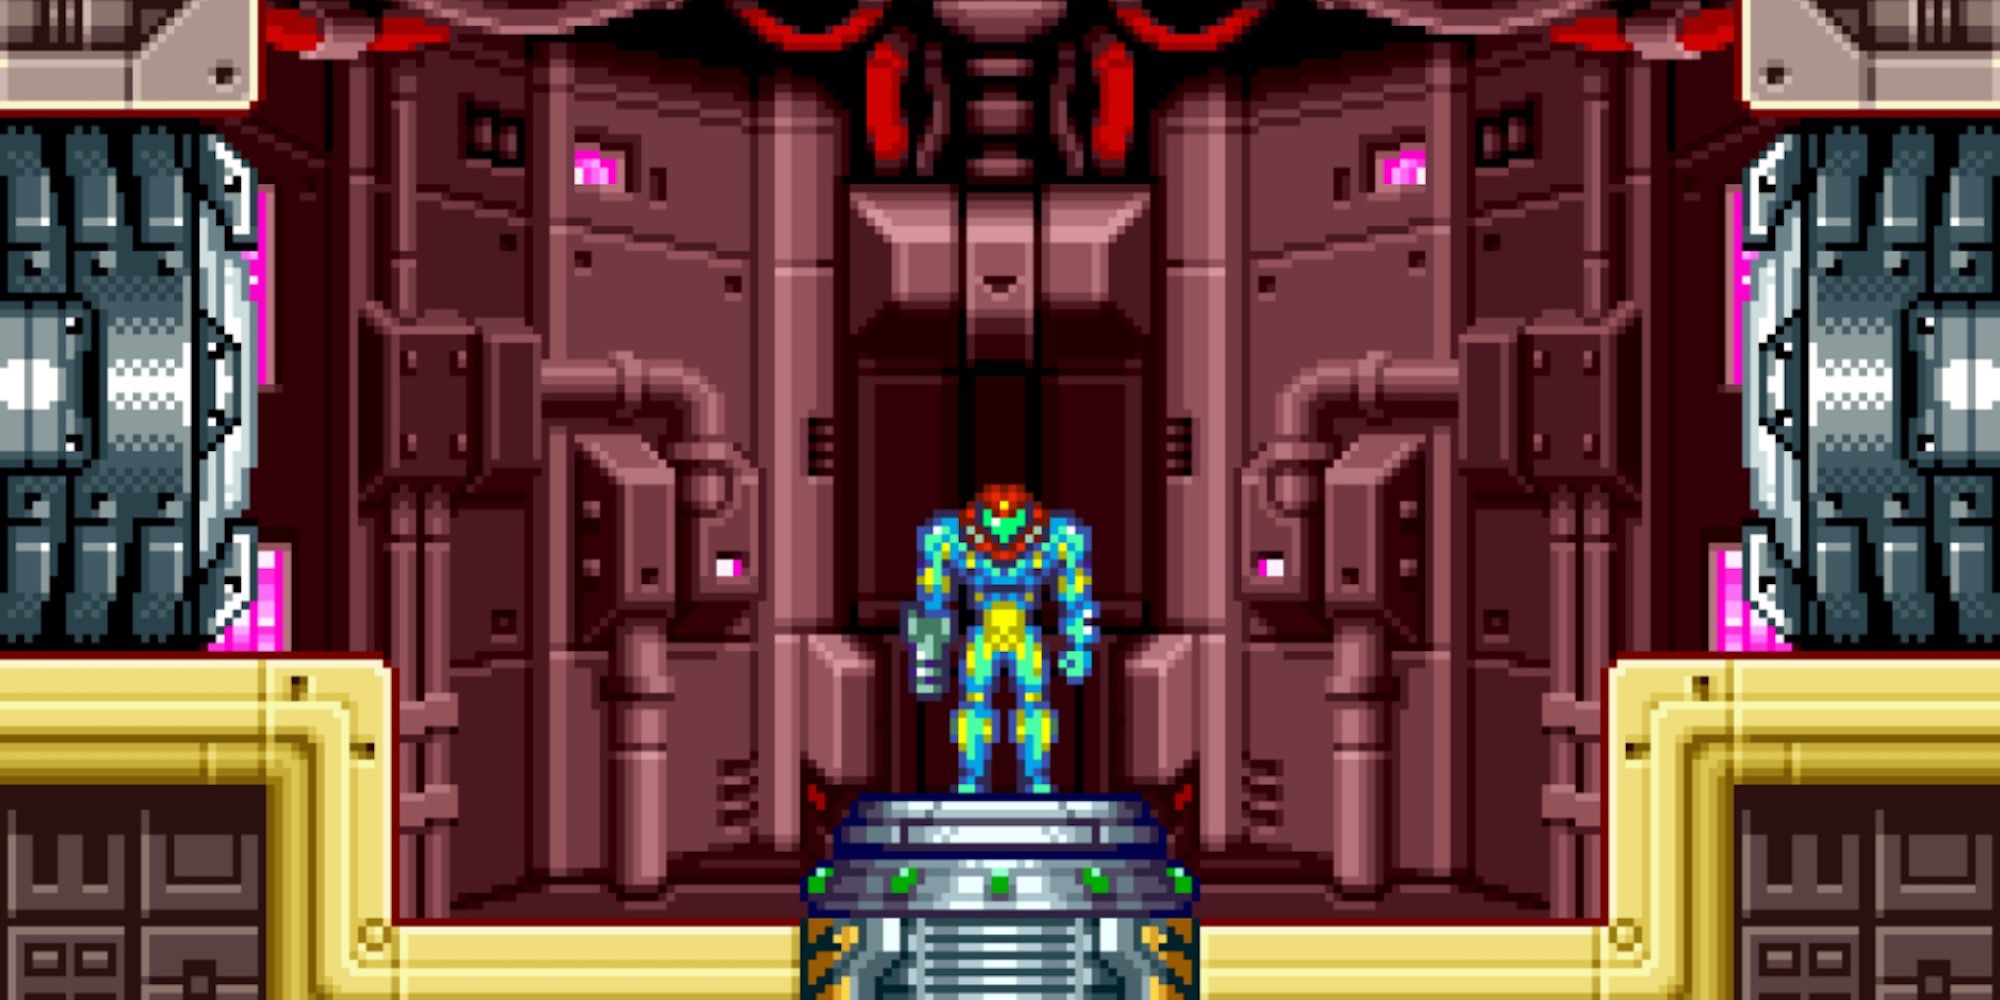 The save room in Metroid Fusion